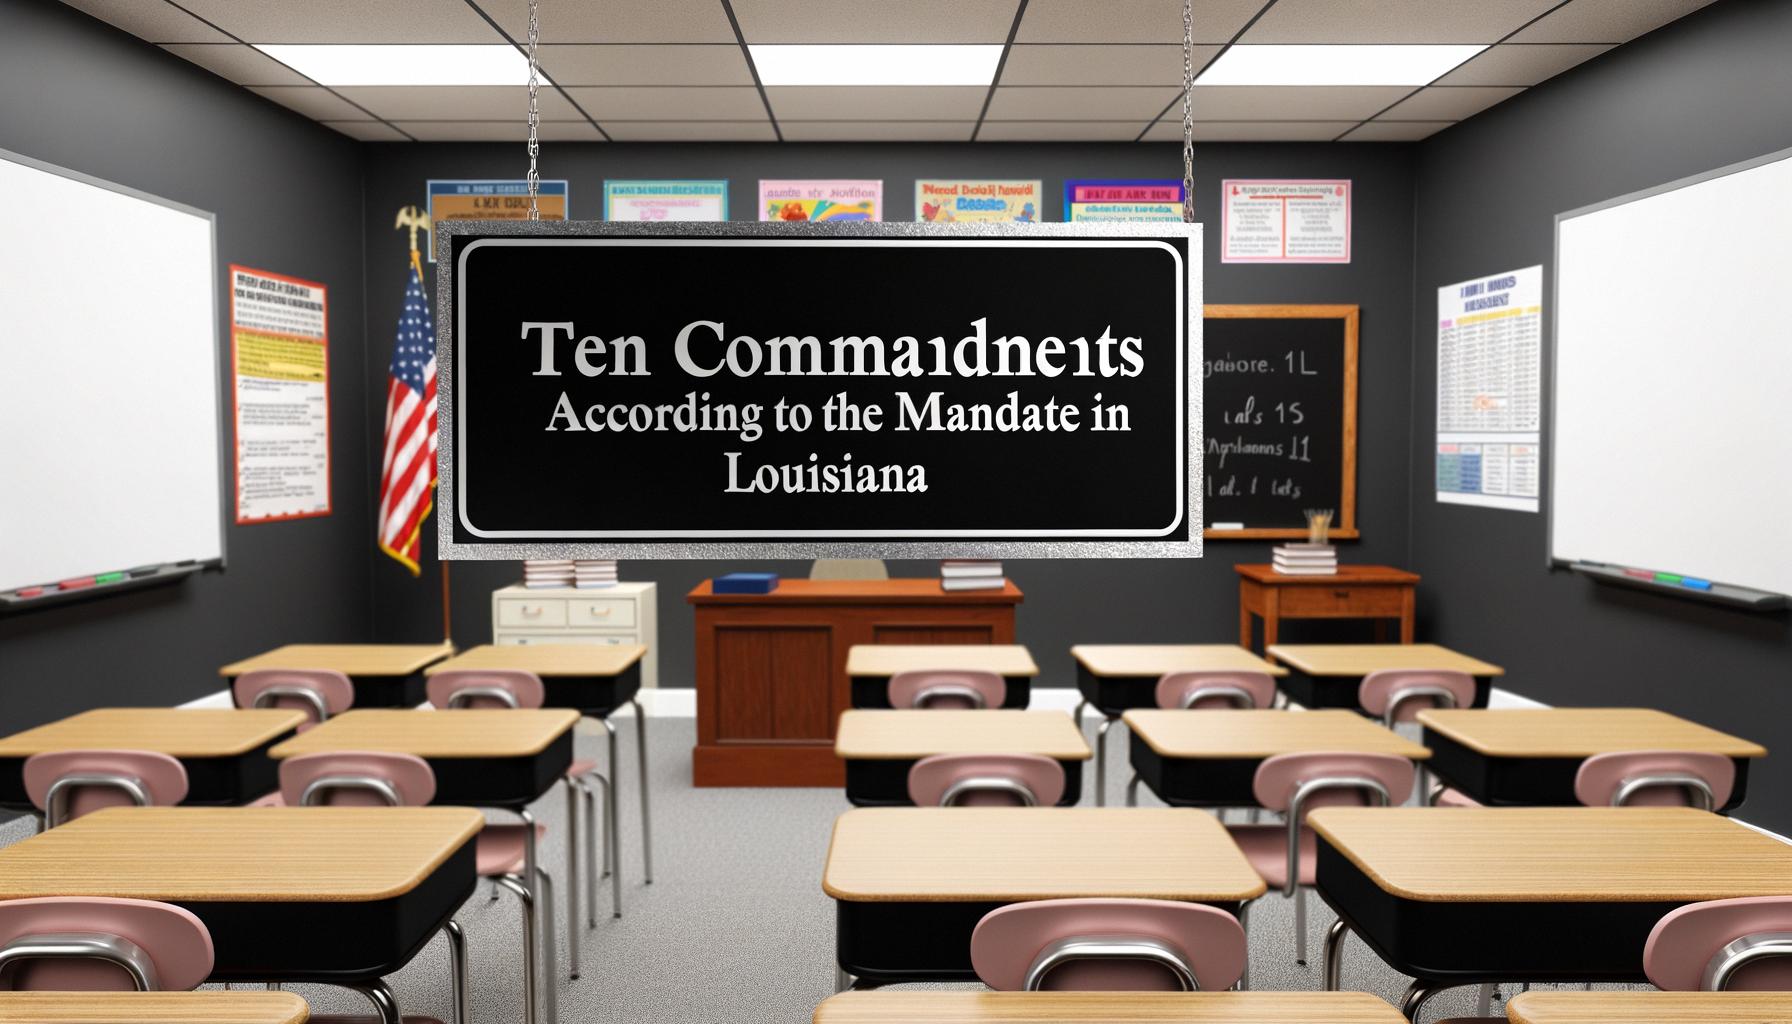 Louisiana requires Ten Commandments in classrooms by 2025, causing legal backlash.